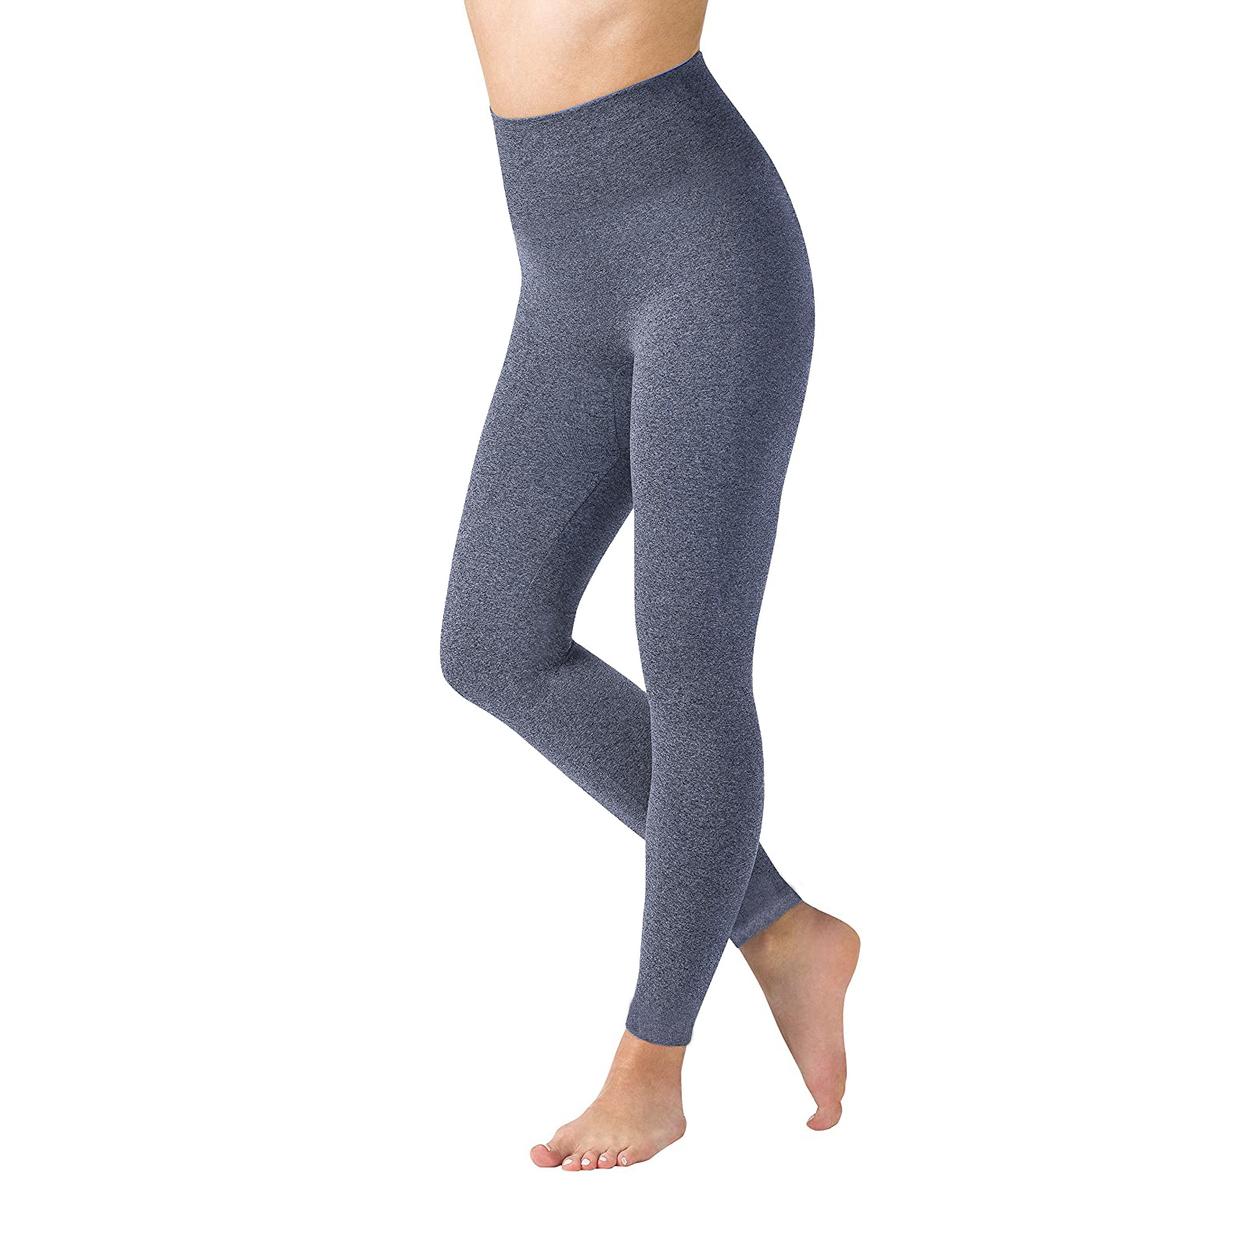 Multi-Pack: Women's High Waisted Ultra-Soft Fleece Lined Warm Marled Leggings(Available In Plus Sizes) - 2-pack, Assorted, Large